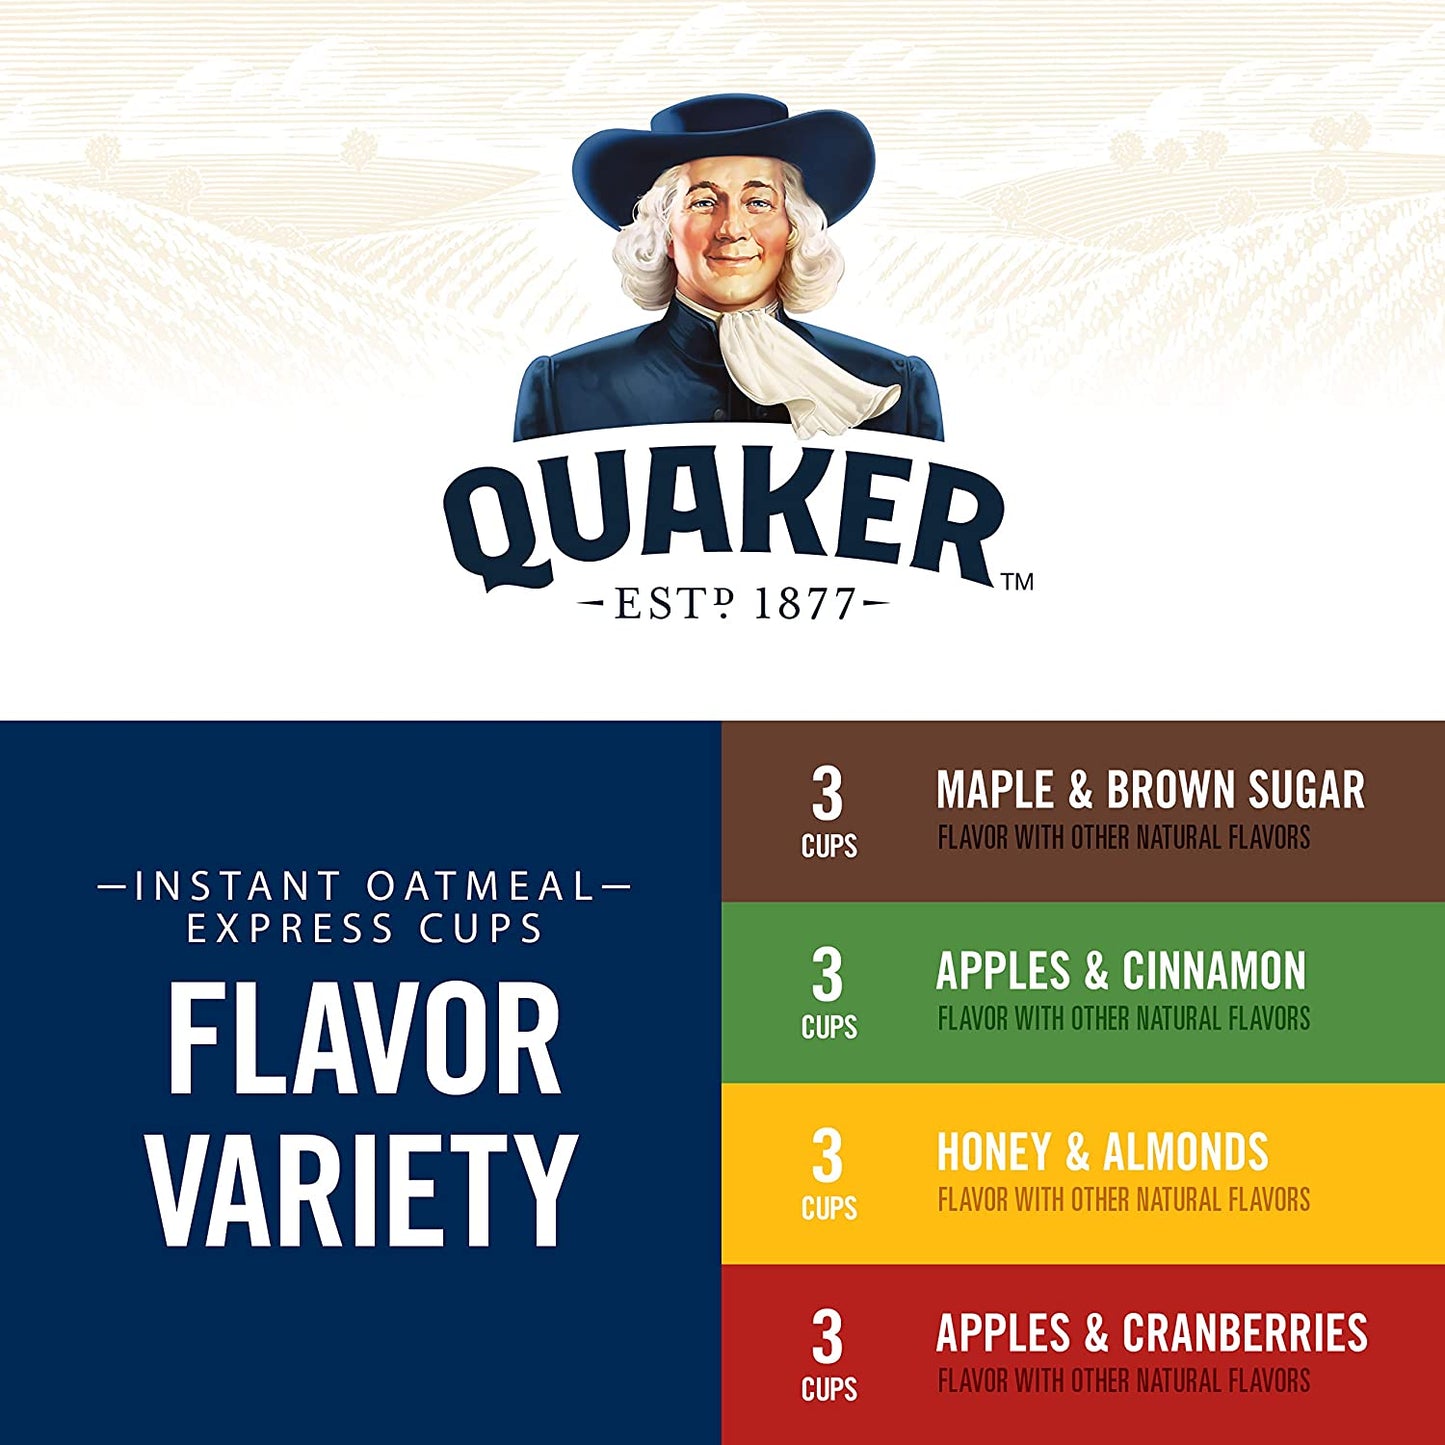 Quaker Instant Oatmeal Express Cups